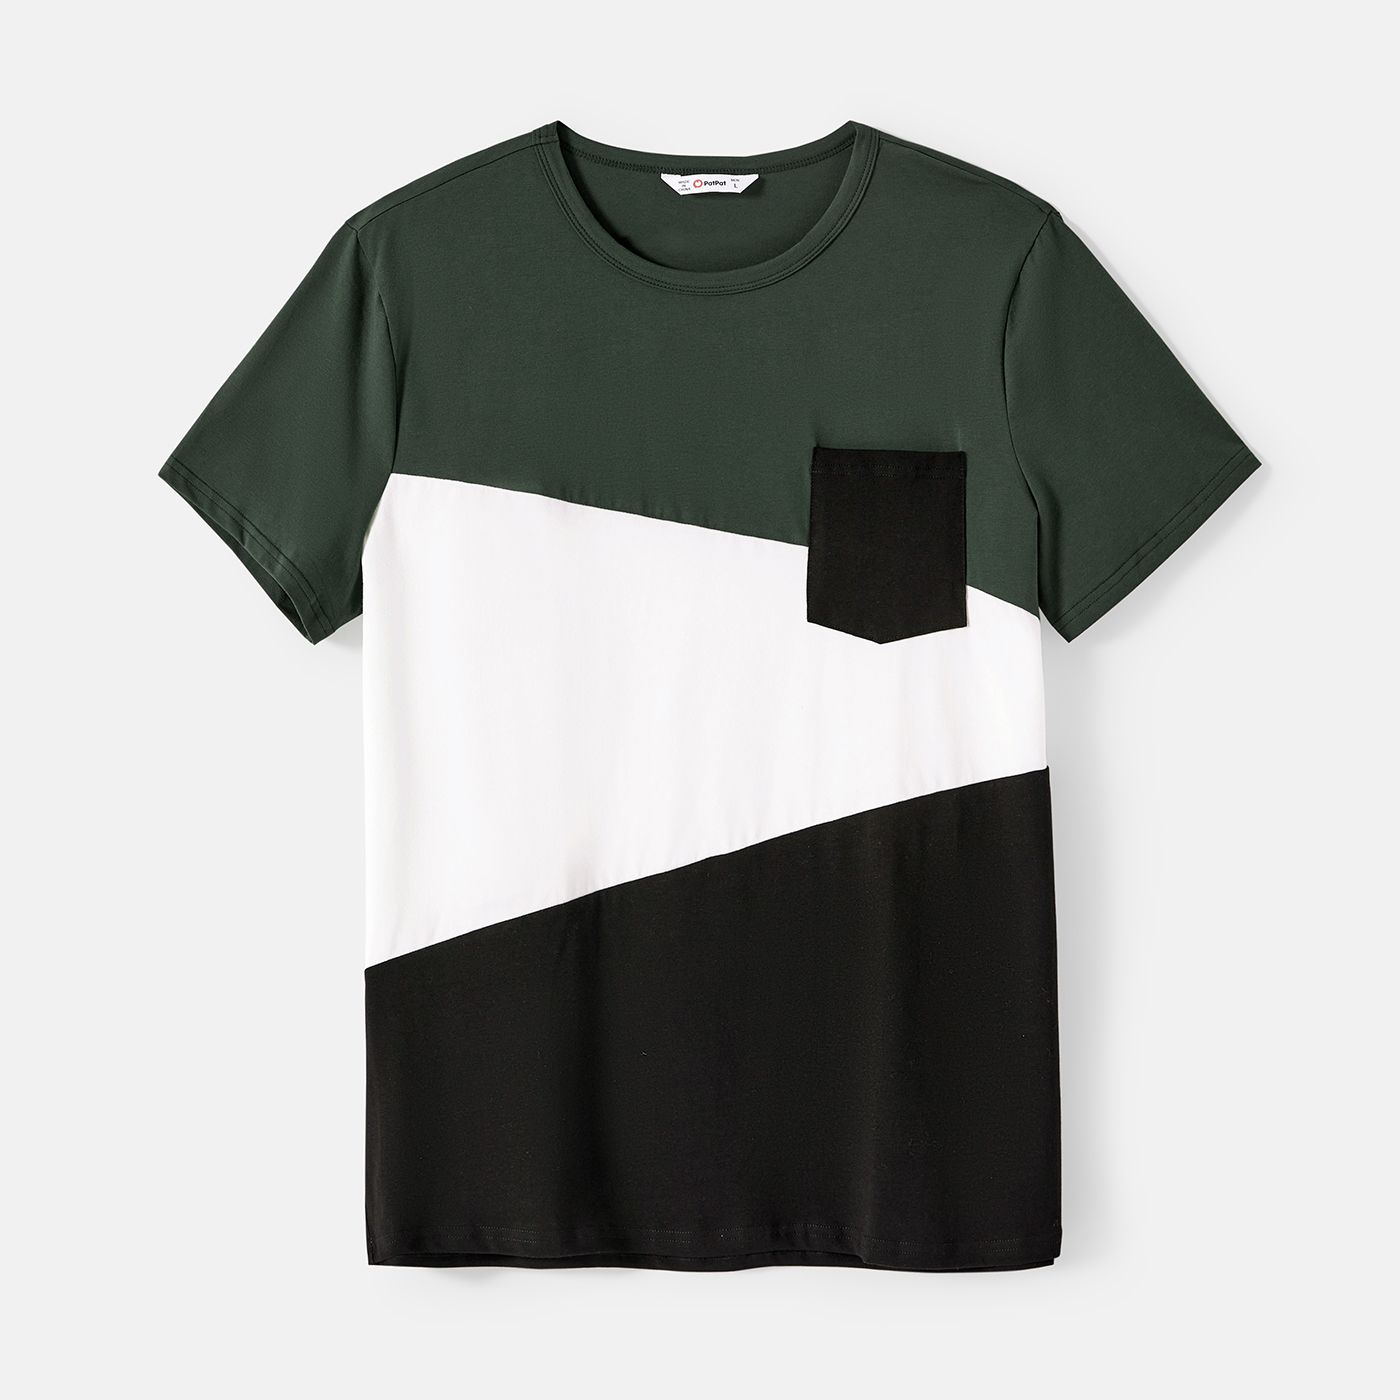 Family Matching Army Green Swiss Dots Cross Wrap V Neck Short-sleeve Dresses And Color Block T-shirts Sets